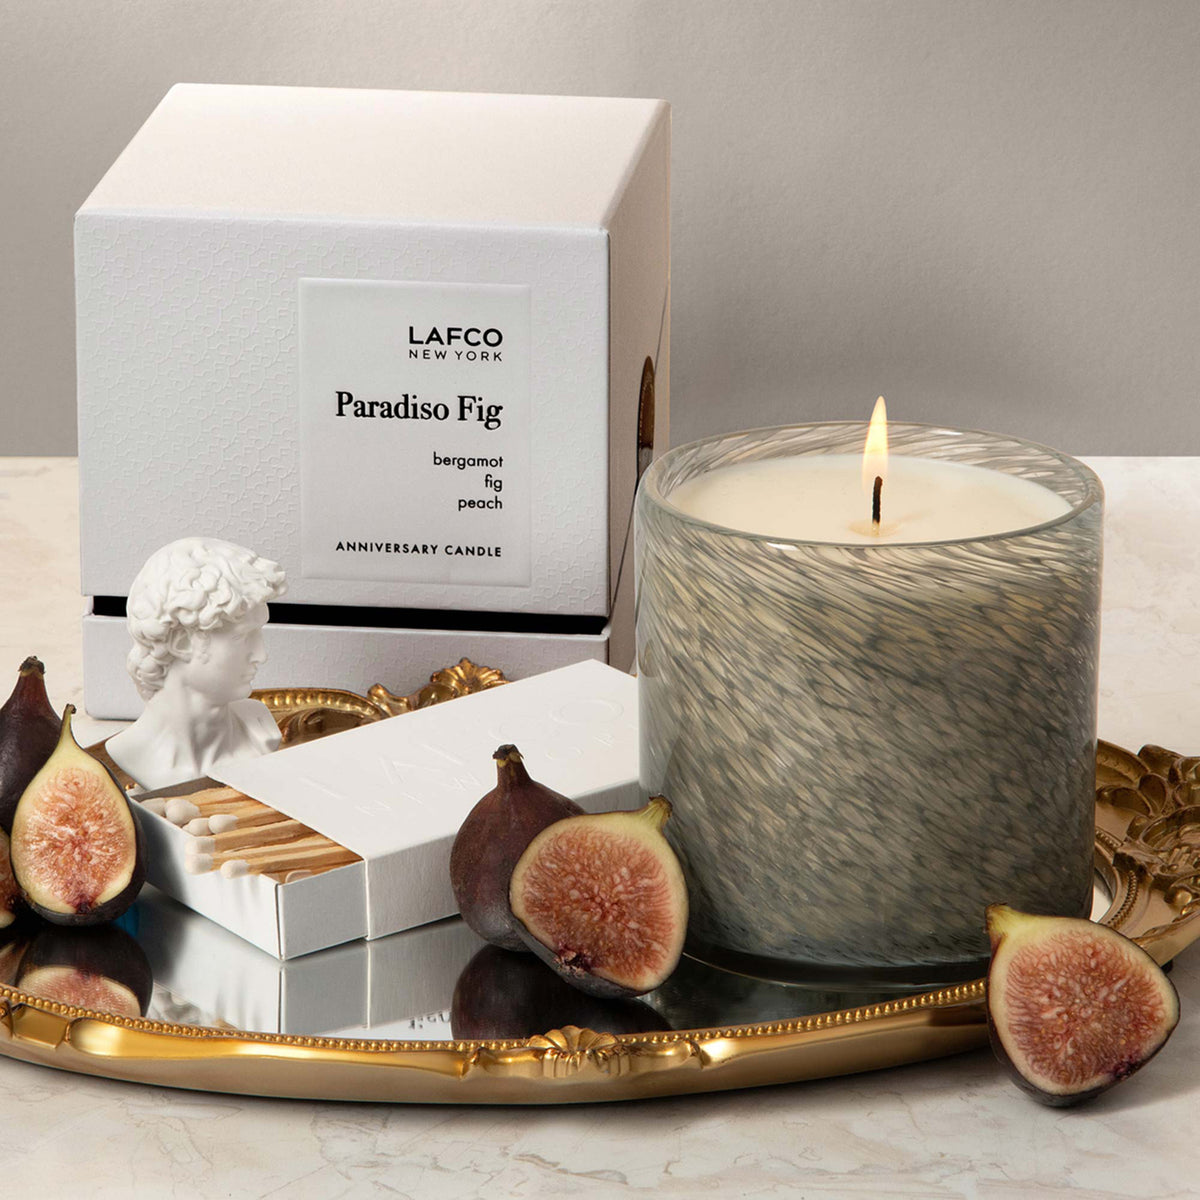 Lafco Paradiso Fig Anniversary Candle .